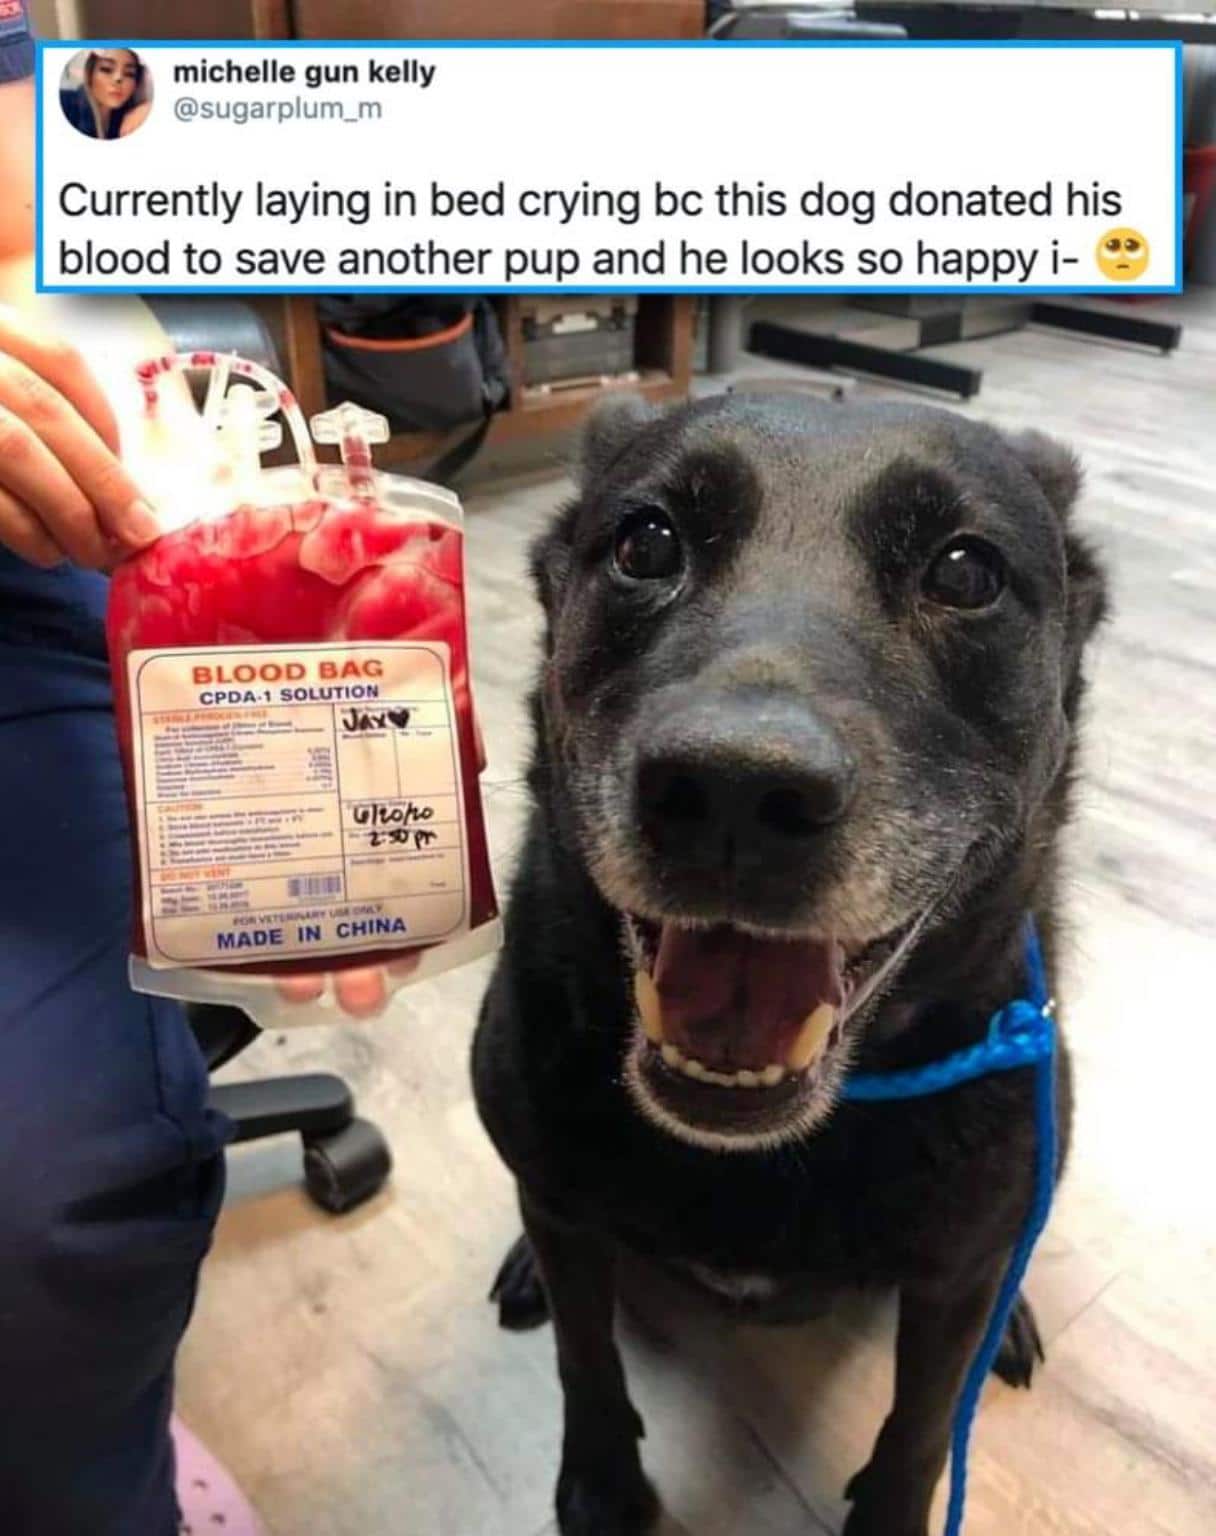 Wholesome memes, China Wholesome Memes Wholesome memes, China text: F. michelle gun kelly @sugarplum_m Currently laying in bed crying bc this dog donated his blood to save another pup and he looks so happy i- BLOOD BAG CPDA.VSOLUTION Olt.åbo MADE IN CHINA —7 